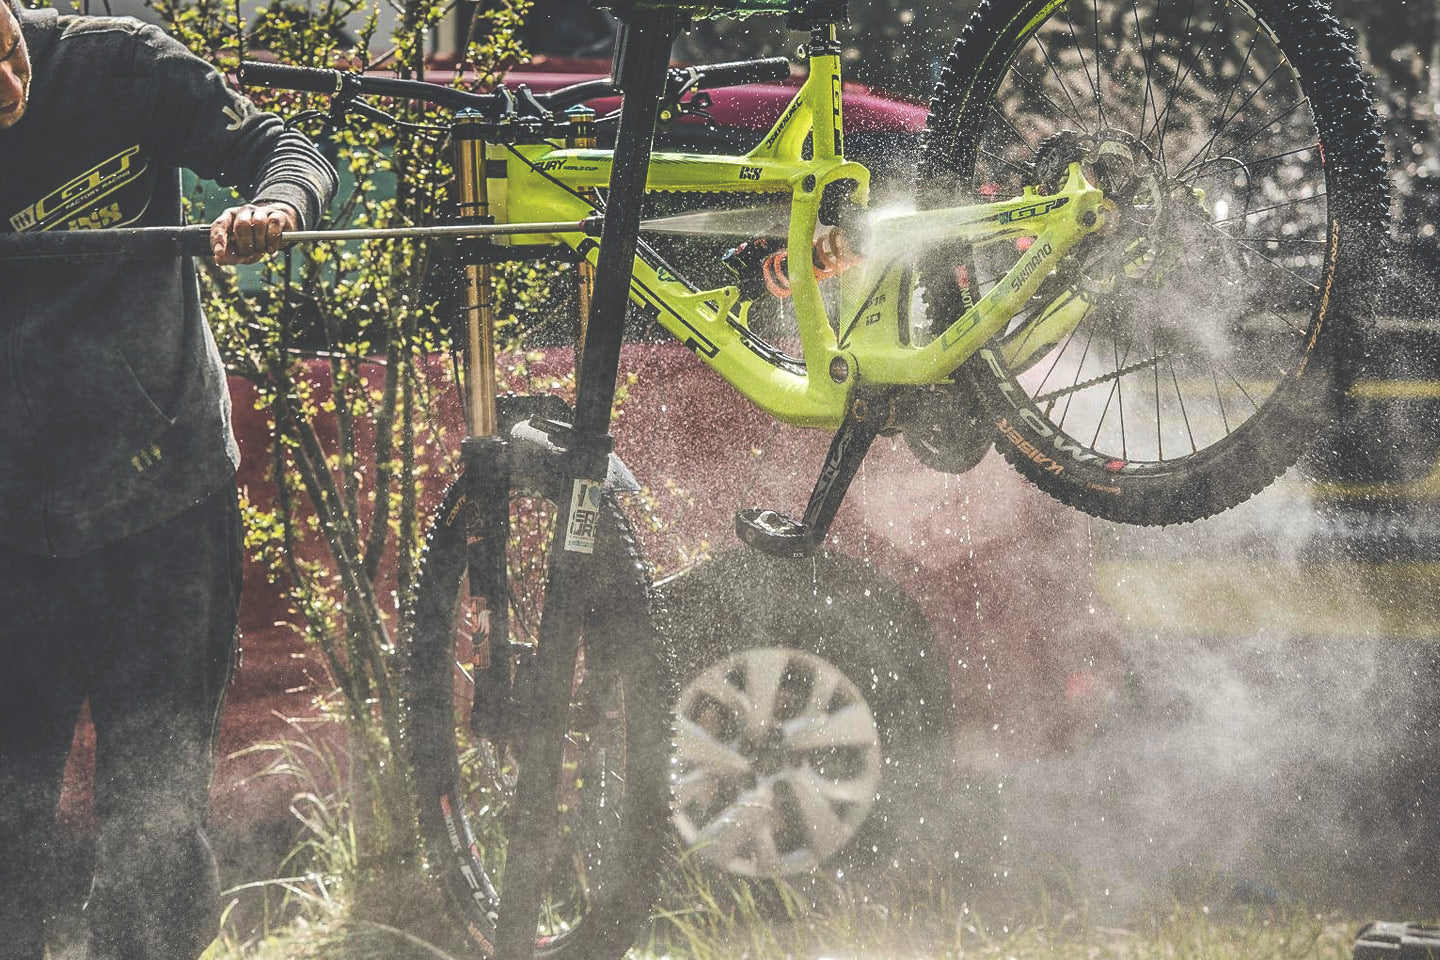 Top Recommended Cleaners For Your Mountain Bike